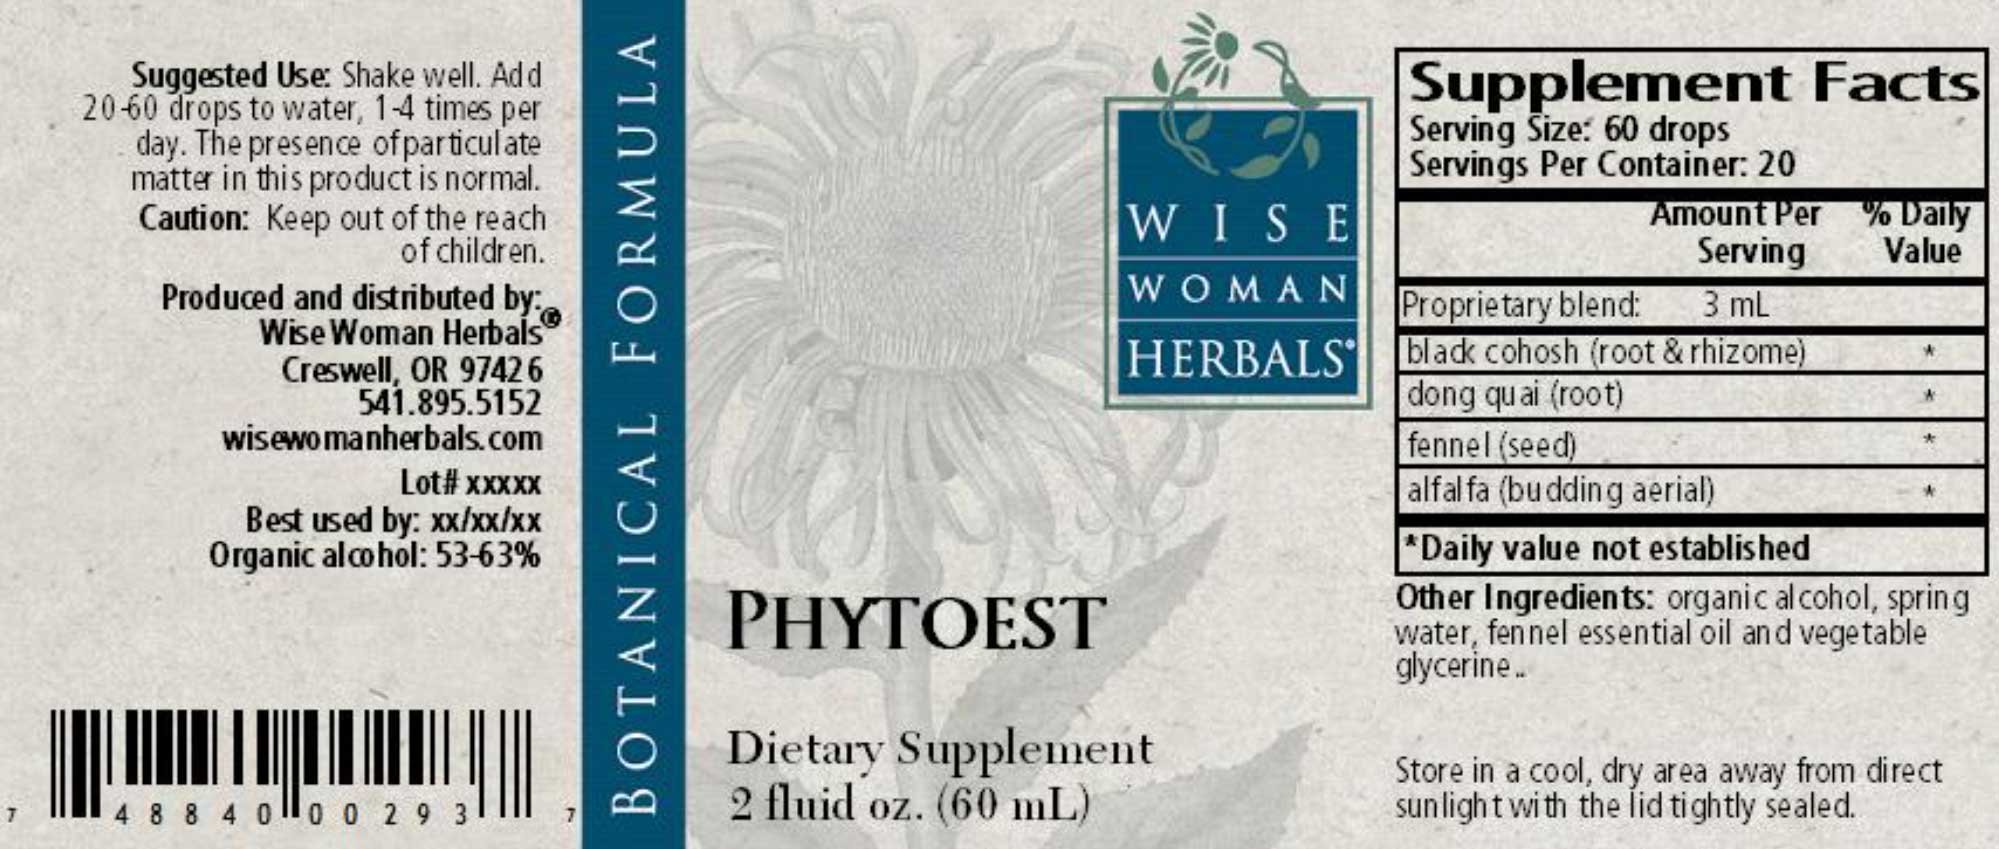 Wise Woman Herbals Phytoest Label